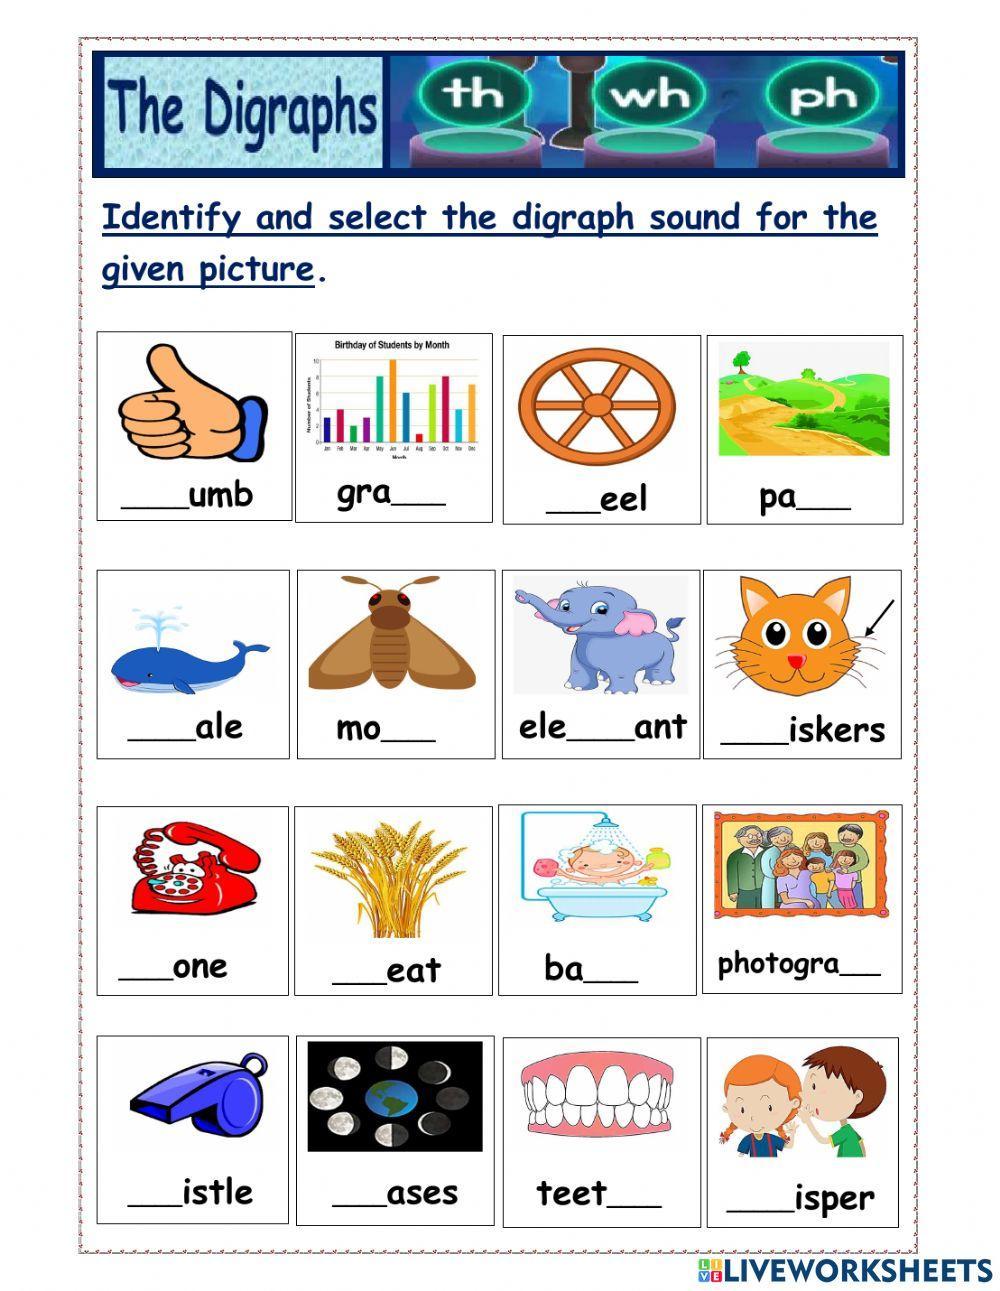 Digraphs th,wh,ph sound words